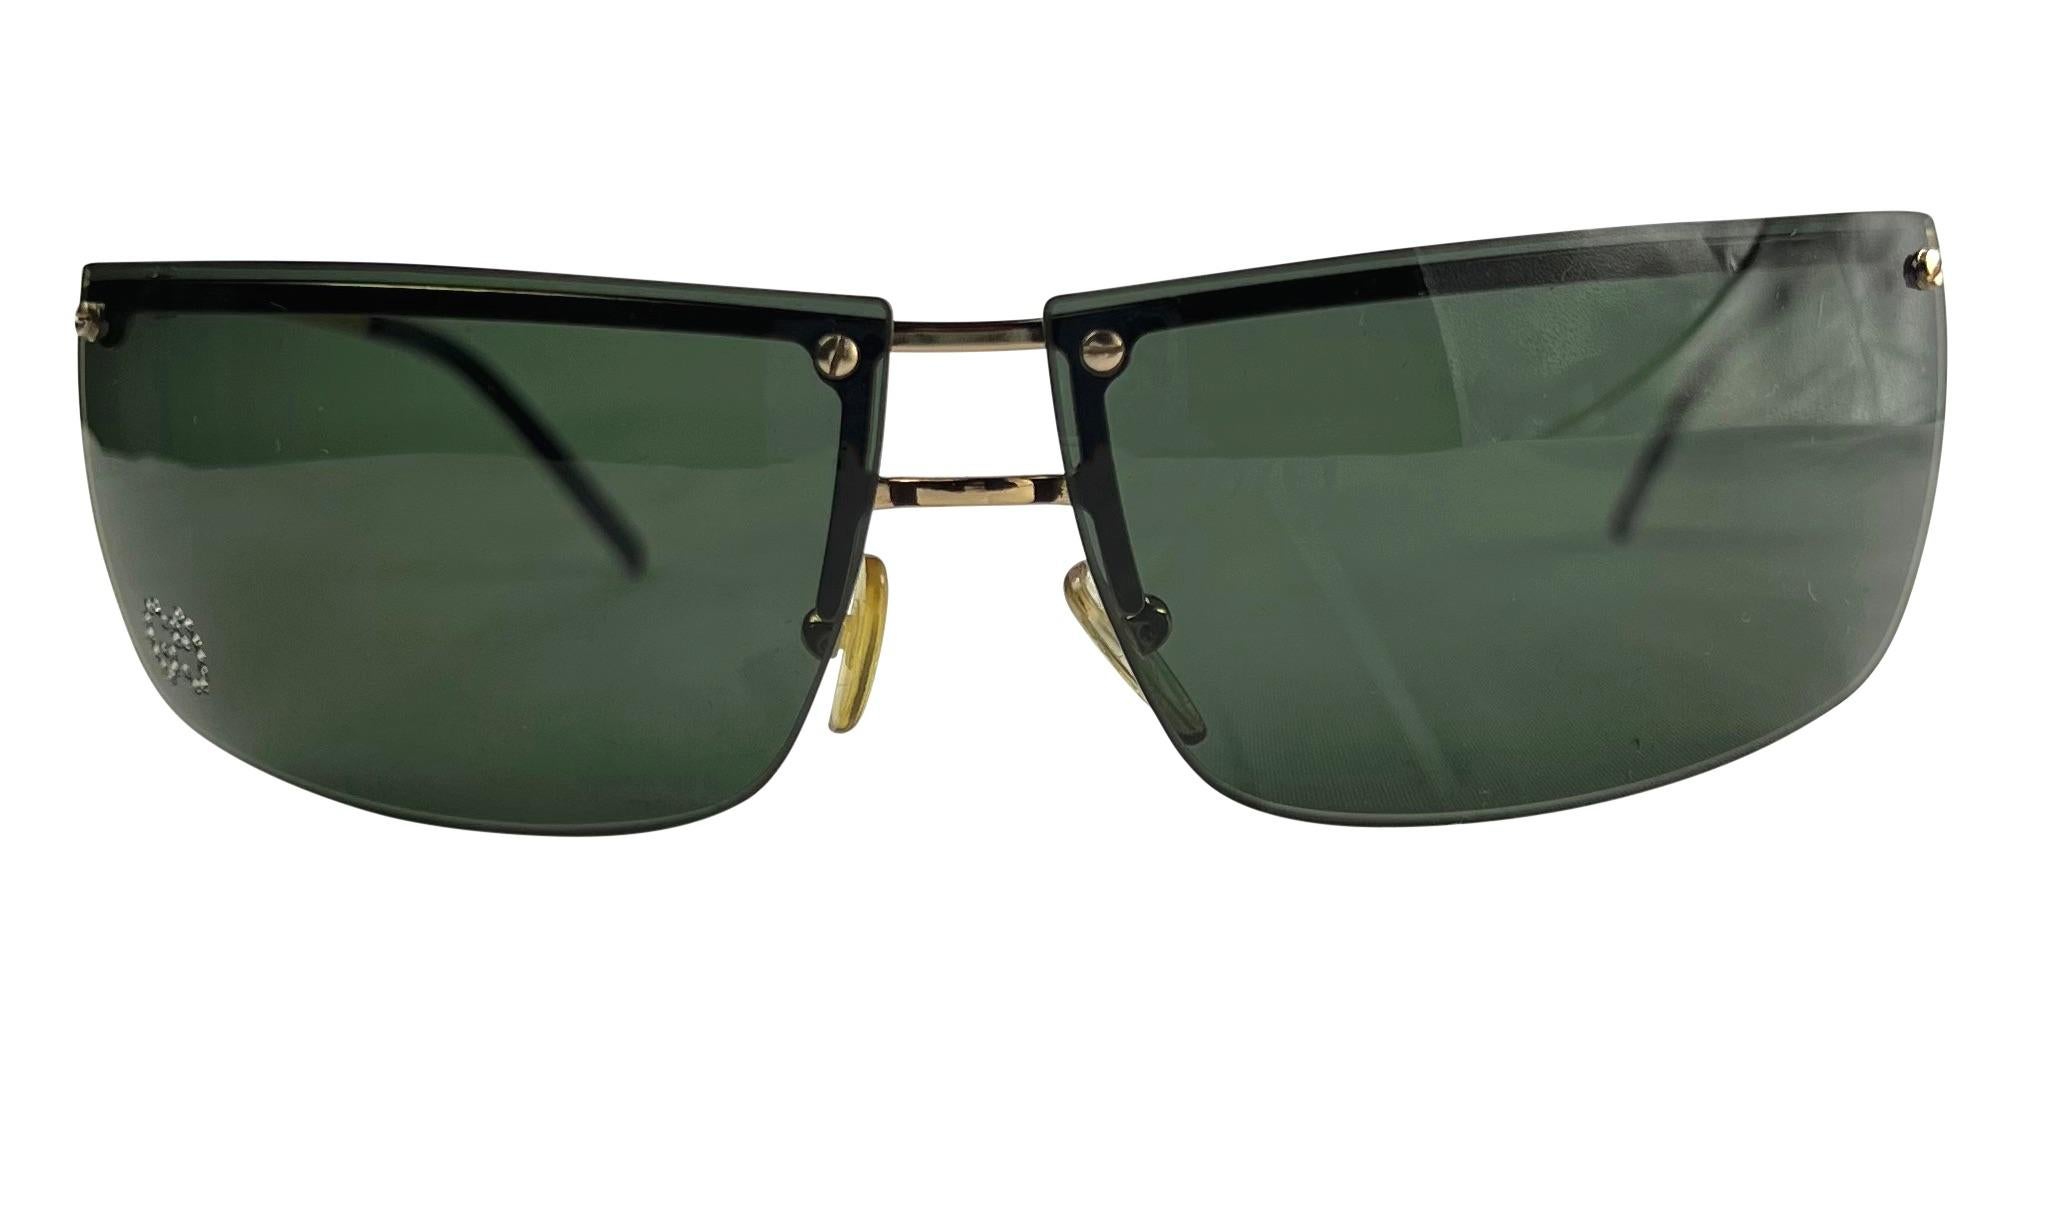 Presenting a fabulous pair of golf-tone rimless Gucci sunglasses designed by Tom Ford. From the early, these ultra-chic sunglasses are the perfect addition to any collection and are made complete with a rhinestone 'GG' logo on the lens.